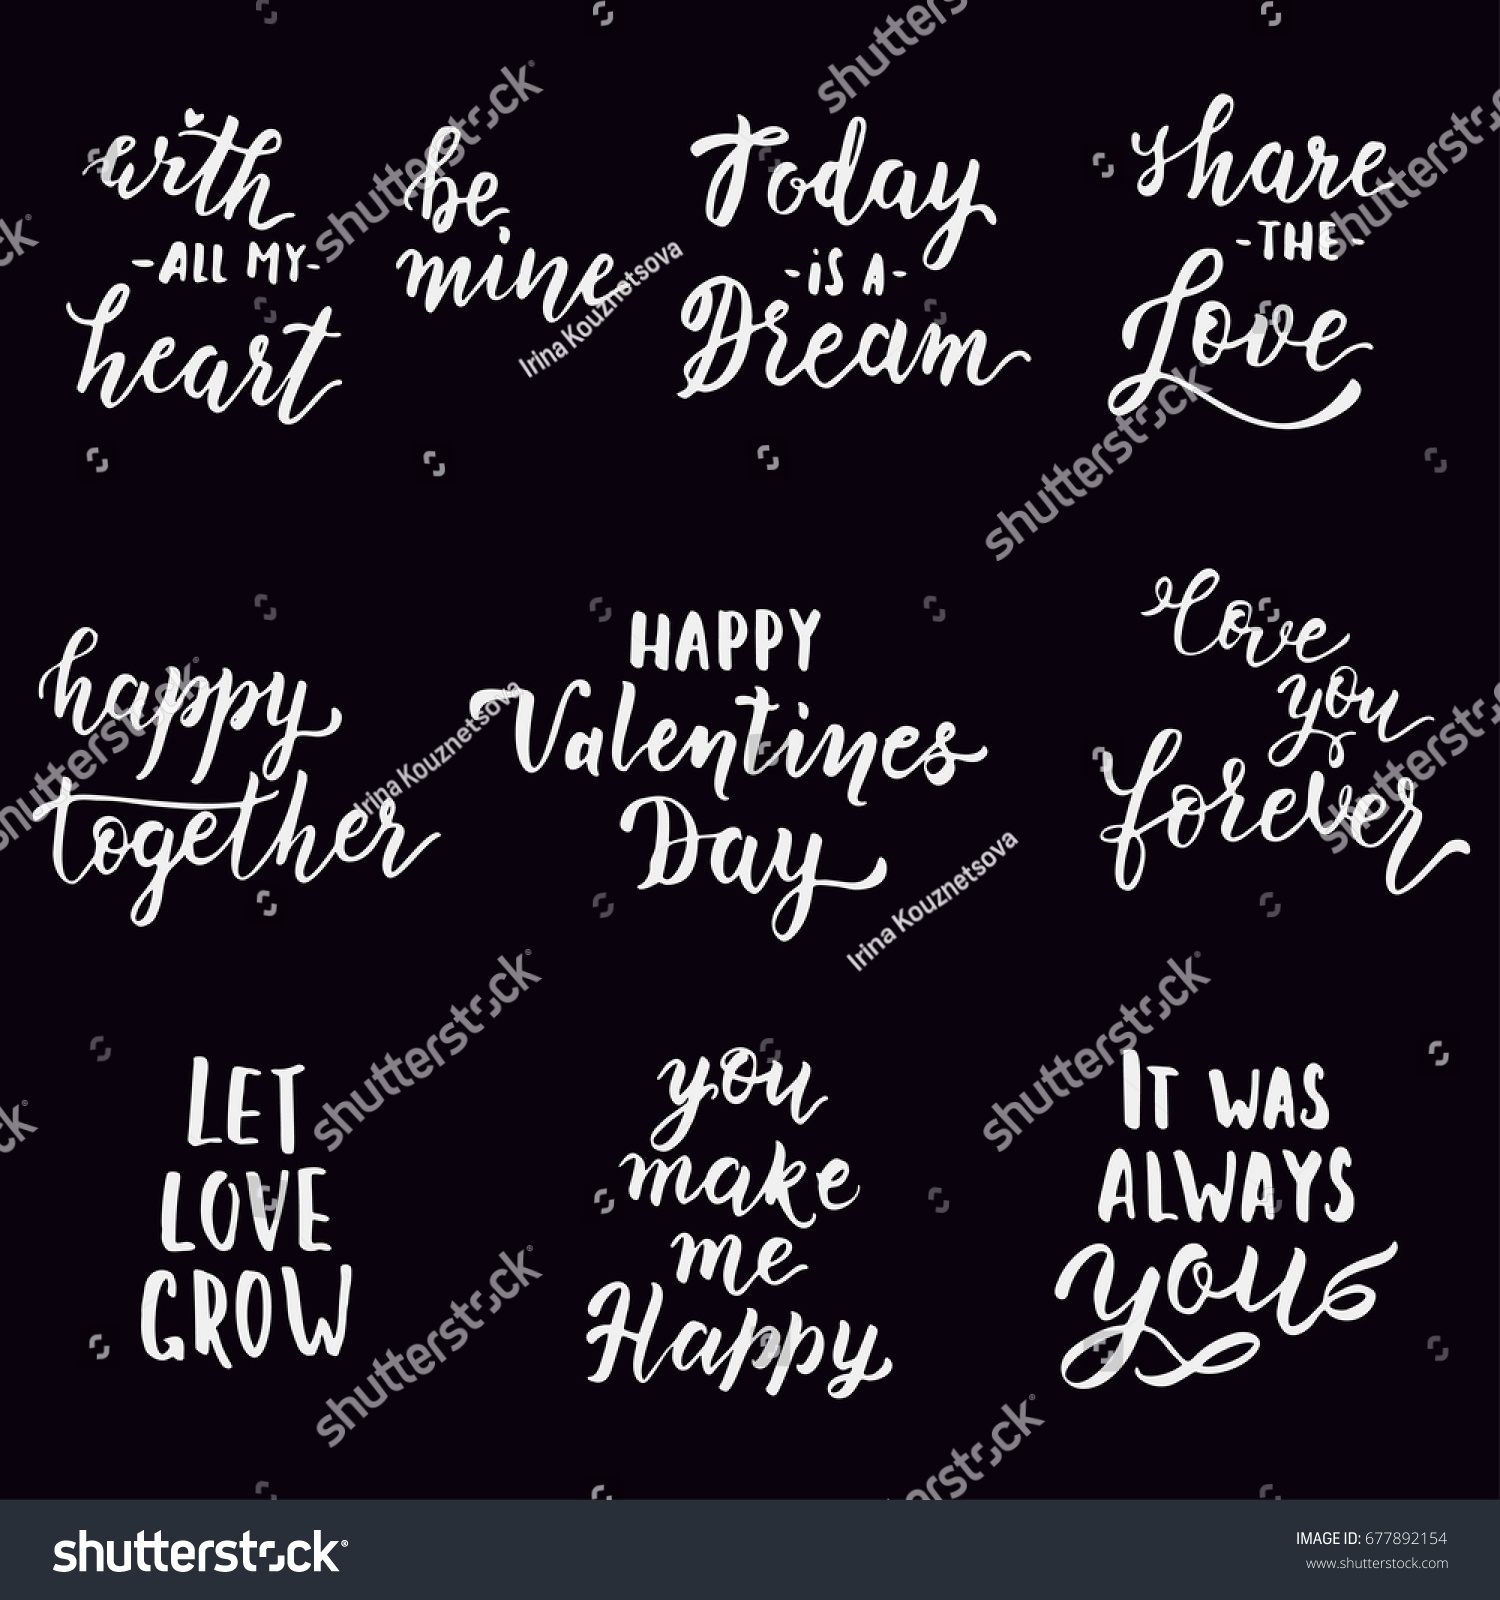 Hand drawn Love quotes vector illustration Brush calligraphy Happy Valentines Day Be